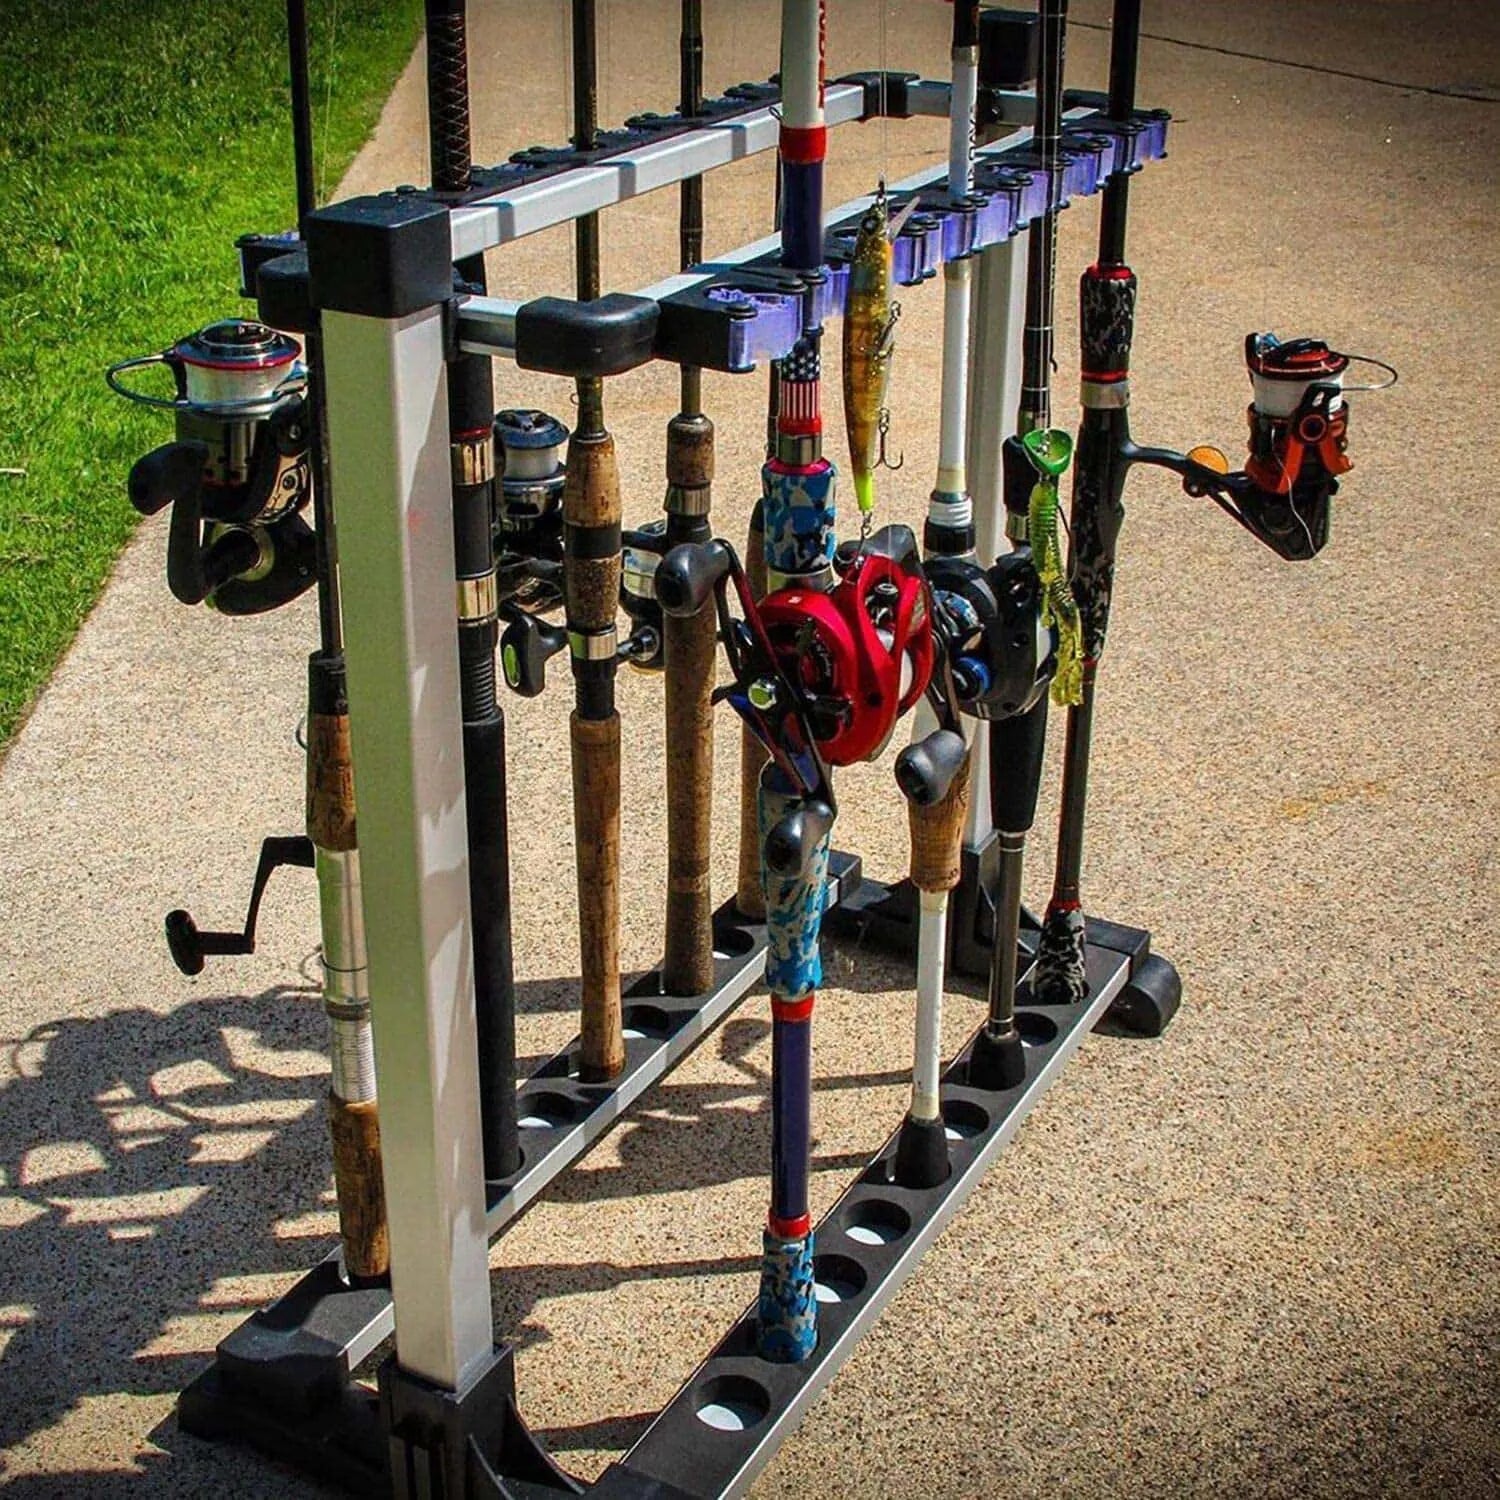 Fishing Made Easy with the Best Fishing Pole Holders Available